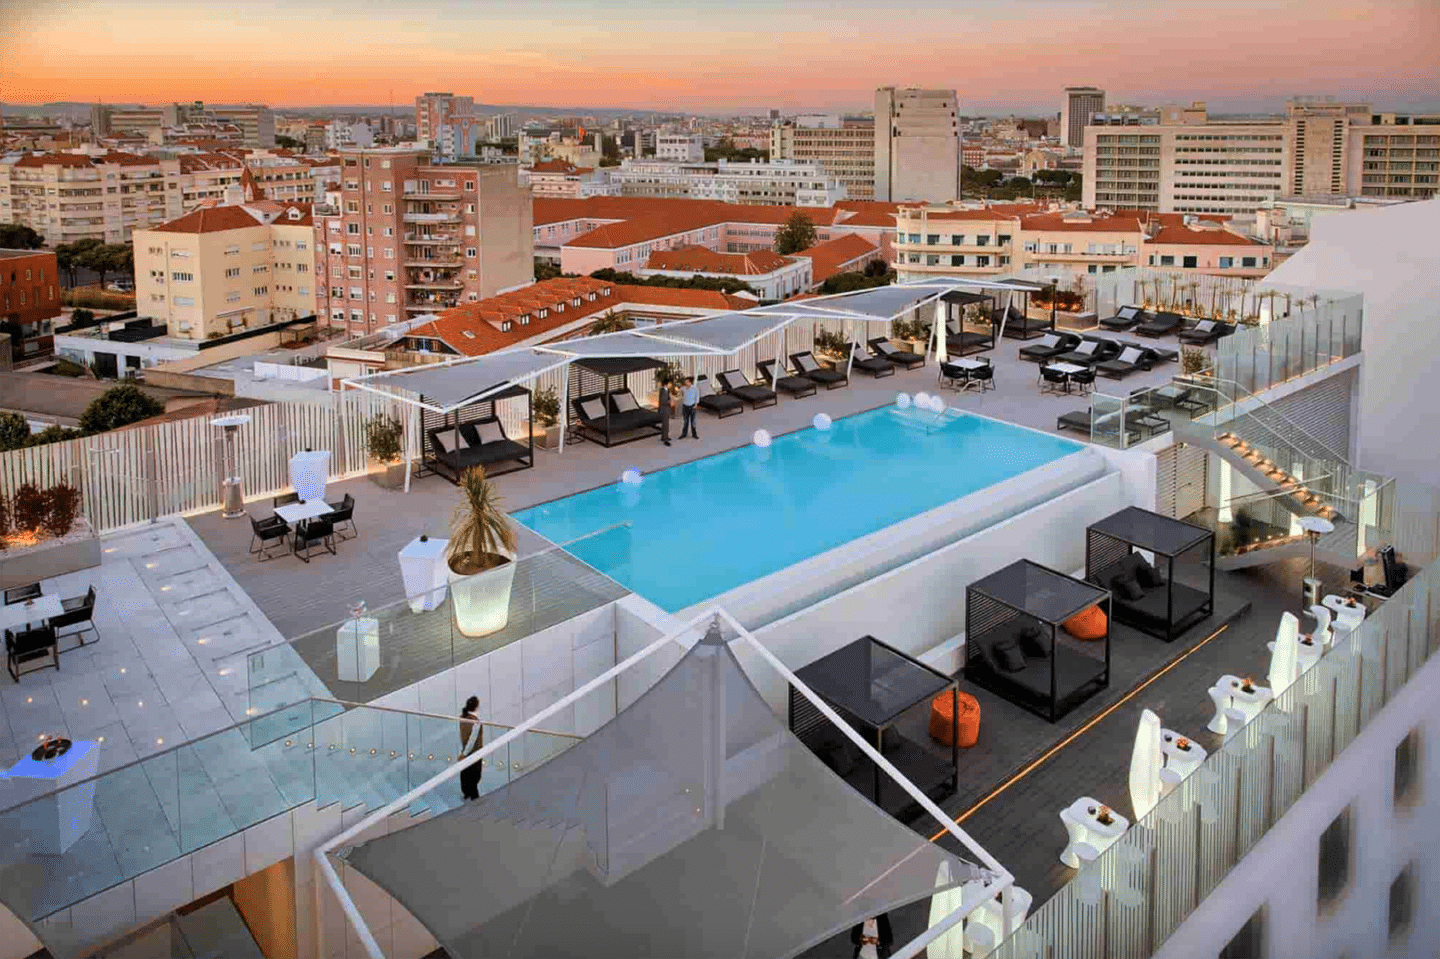 Best rooftop bars Lisbon has to offer, by travel blogger What The Fab